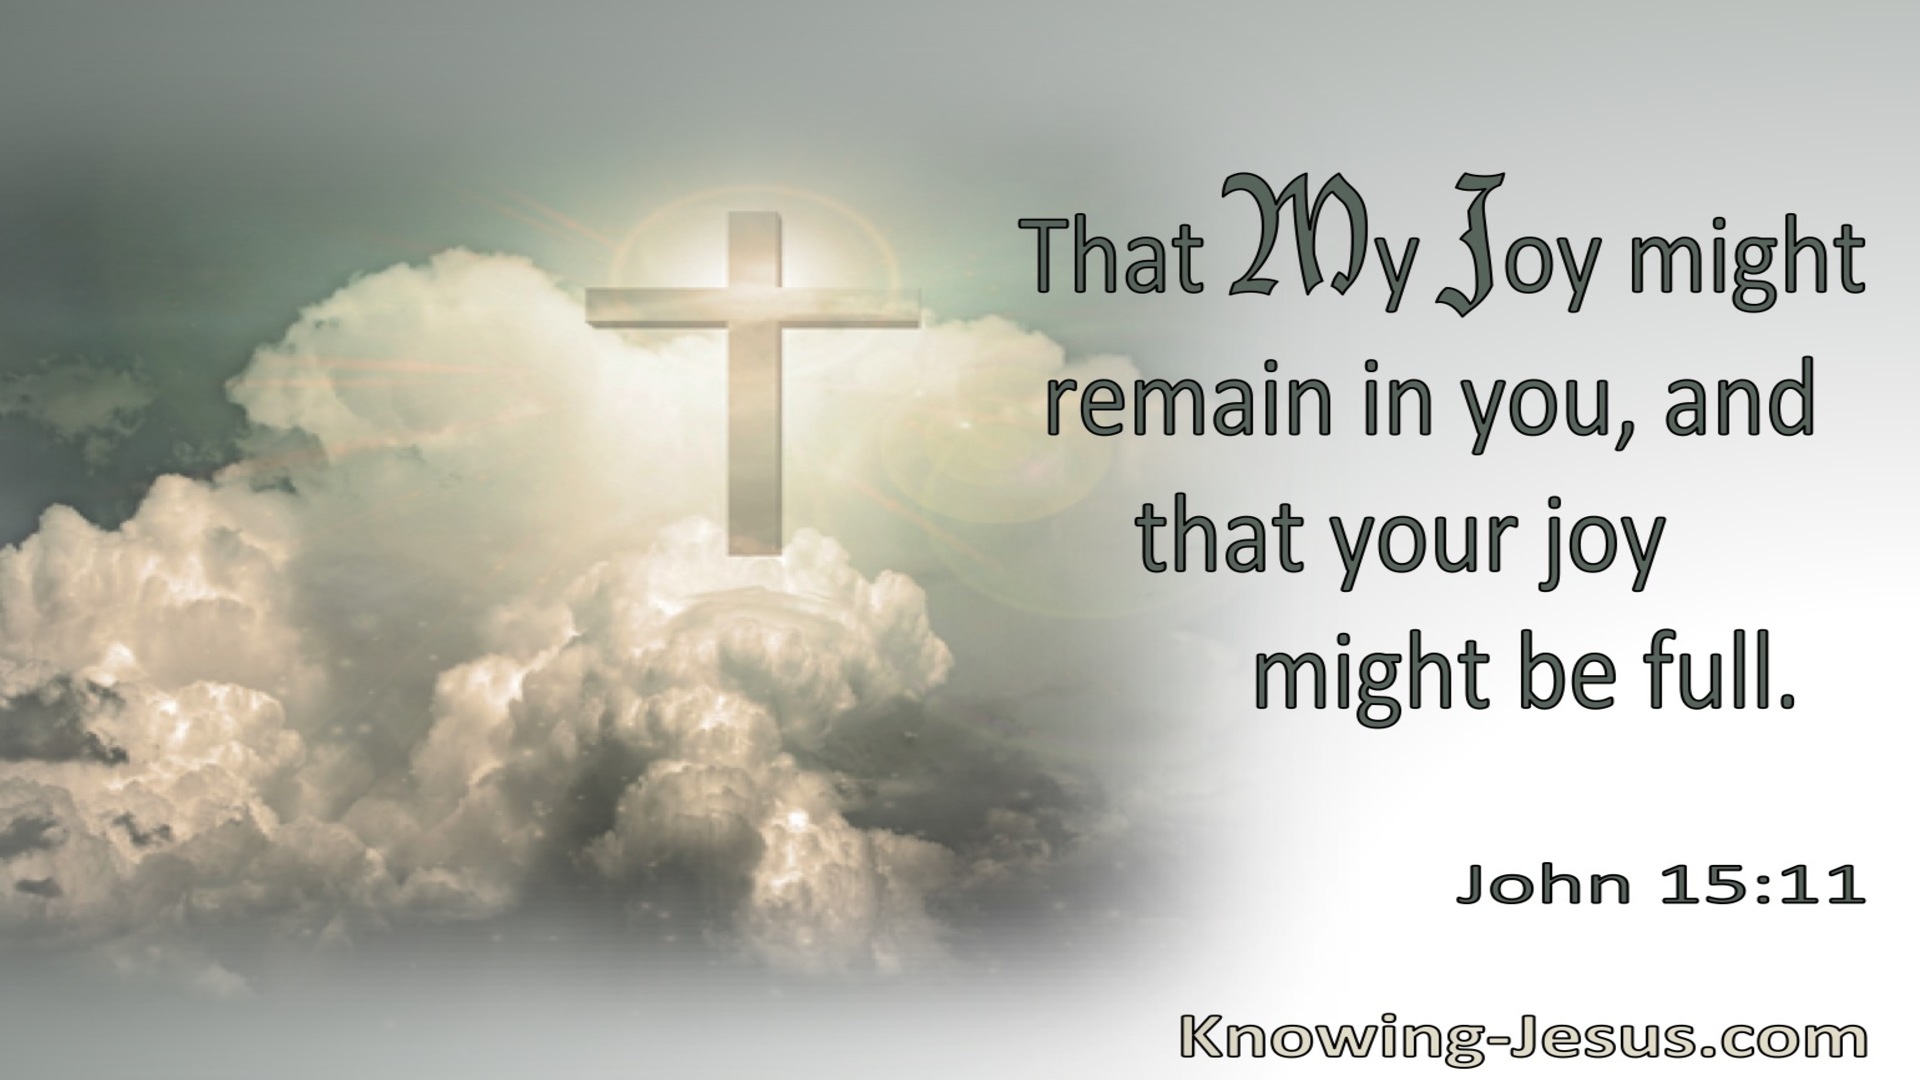 John 15:11 That My Joy Might Remain In You And Your Joy Be Full (utmost)08:31